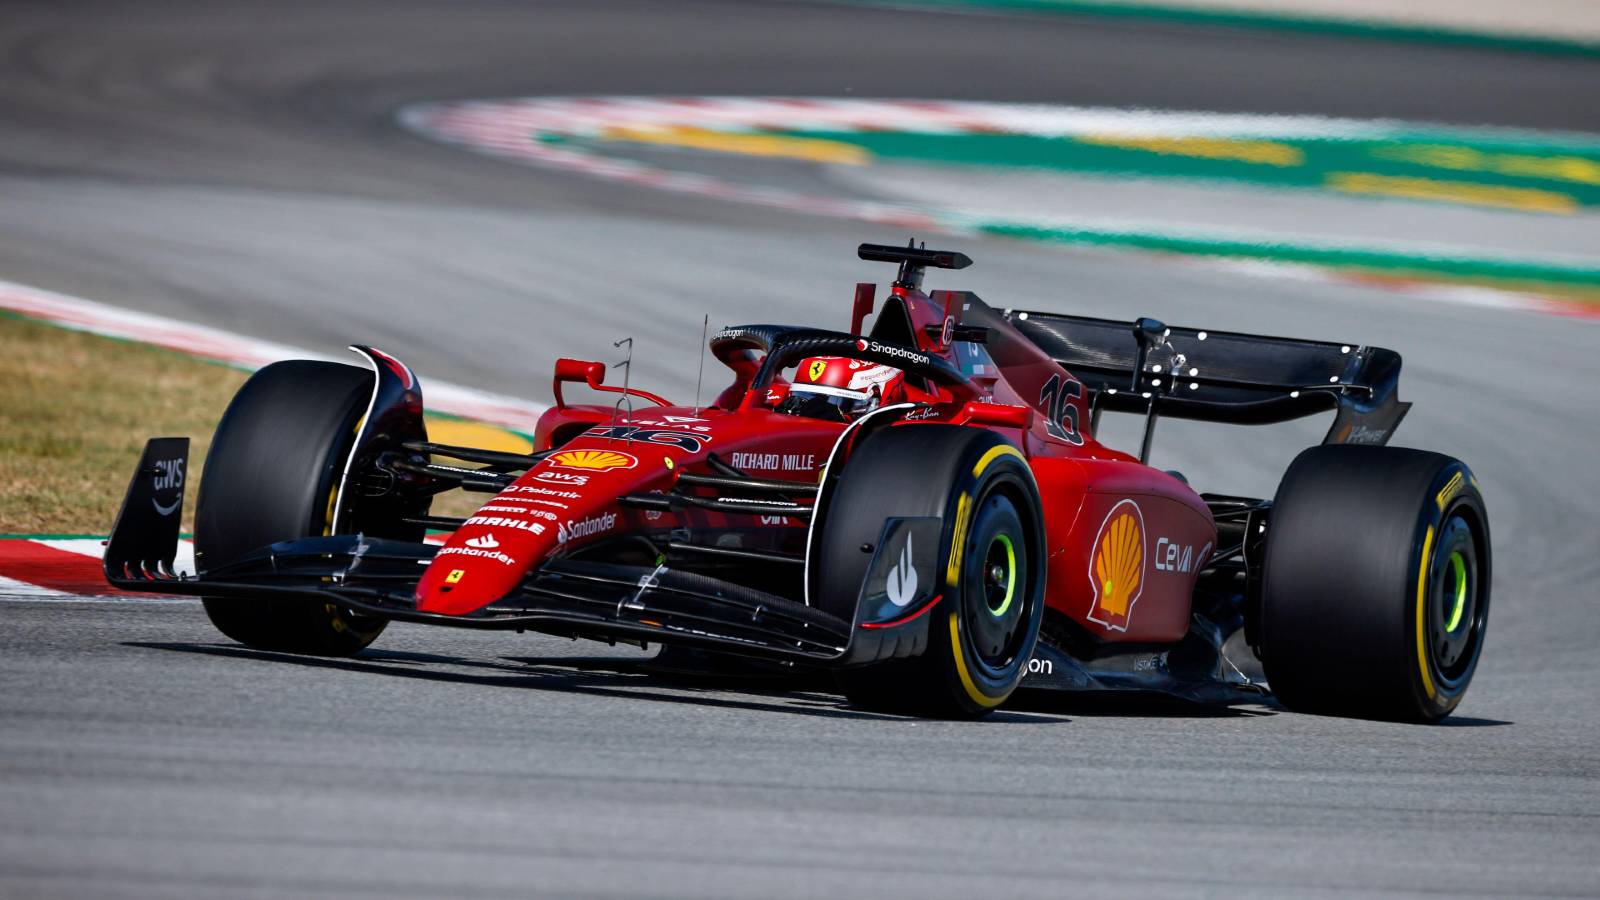 Charles Leclerc's Ferrari in practice for the Spanish GP. Barcelona May 2022.